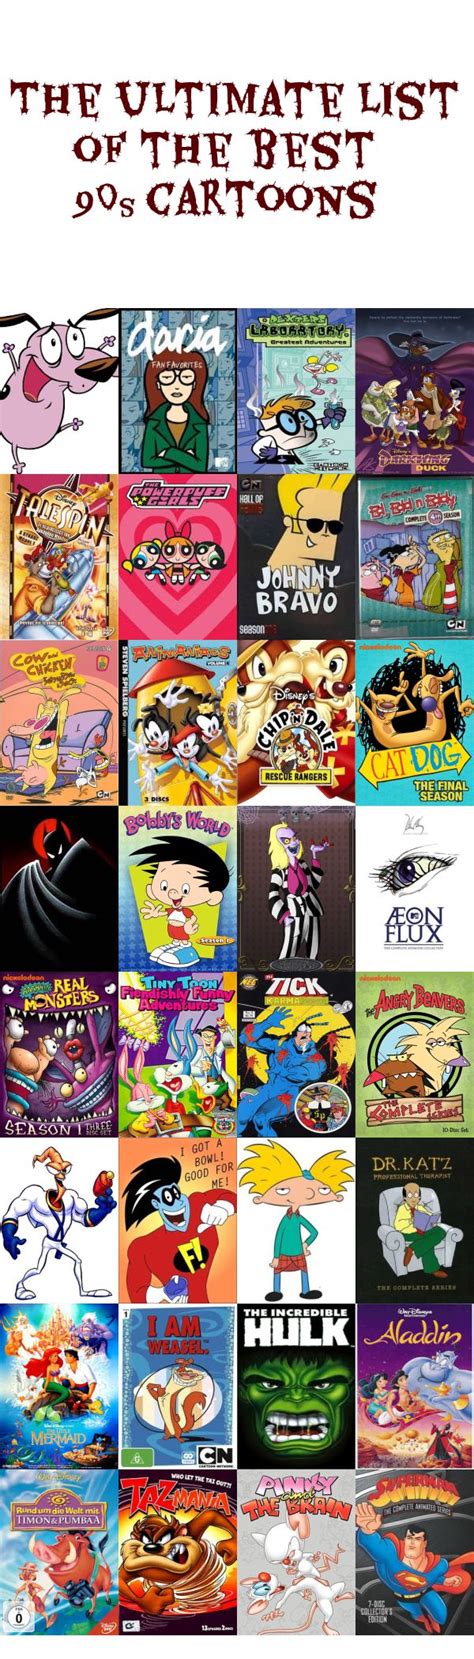 The Ultimate List Of The Best 90s Cartoons Best 90s Cartoons 90s